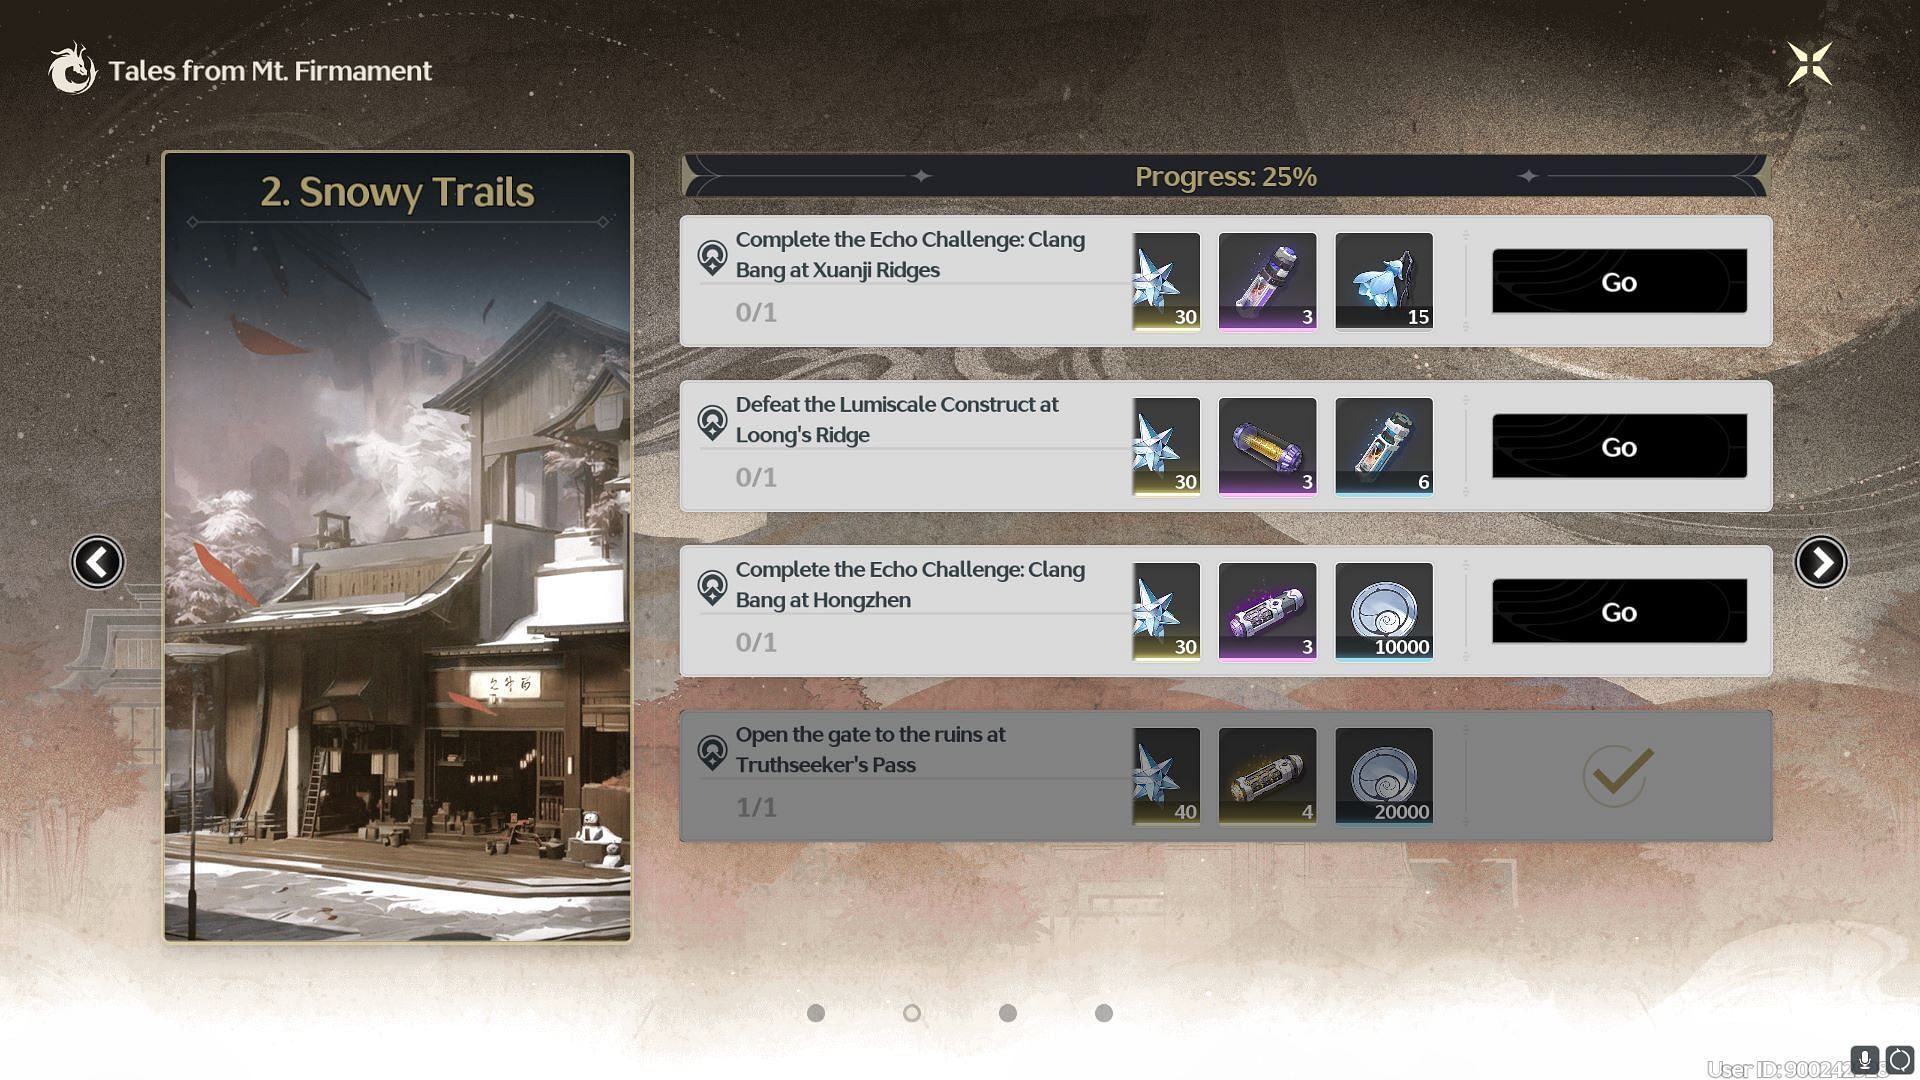 Snowy Trails tasks and rewards in Tales from Mt. Firmament (Image via Kuro Games)